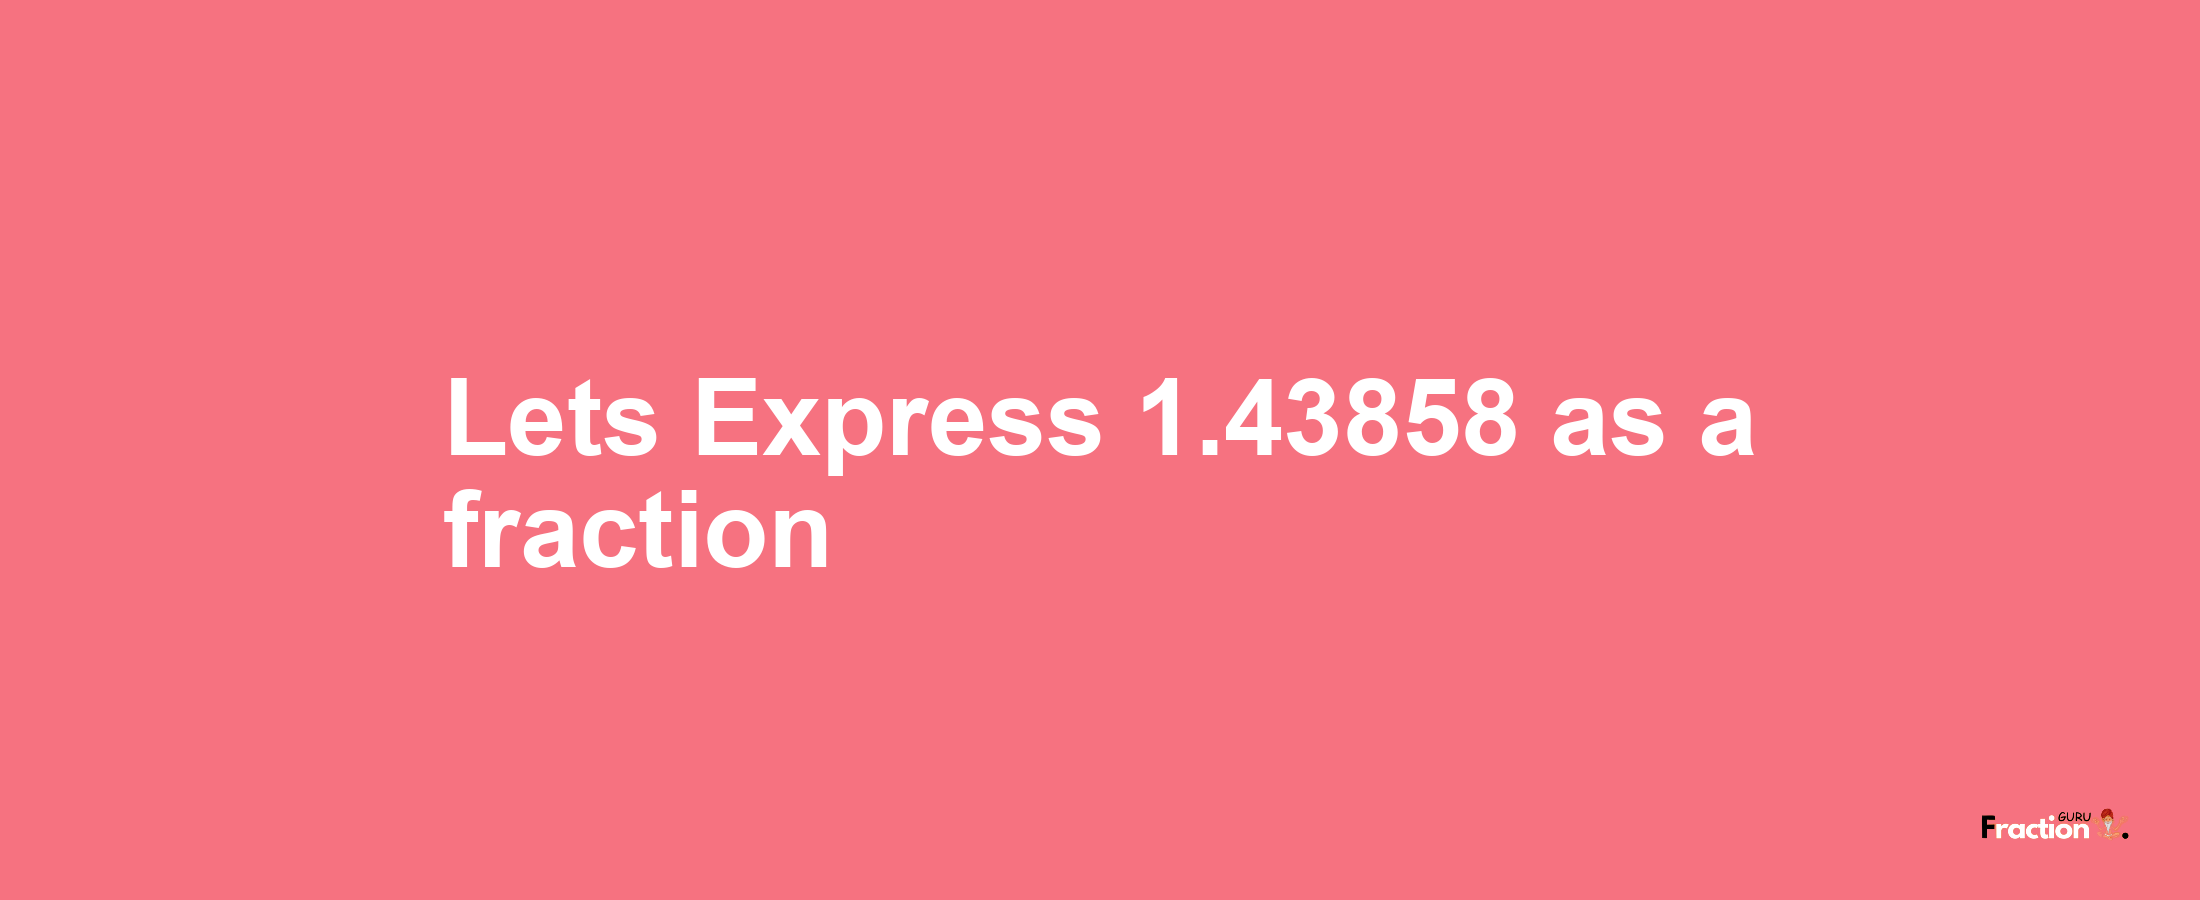 Lets Express 1.43858 as afraction